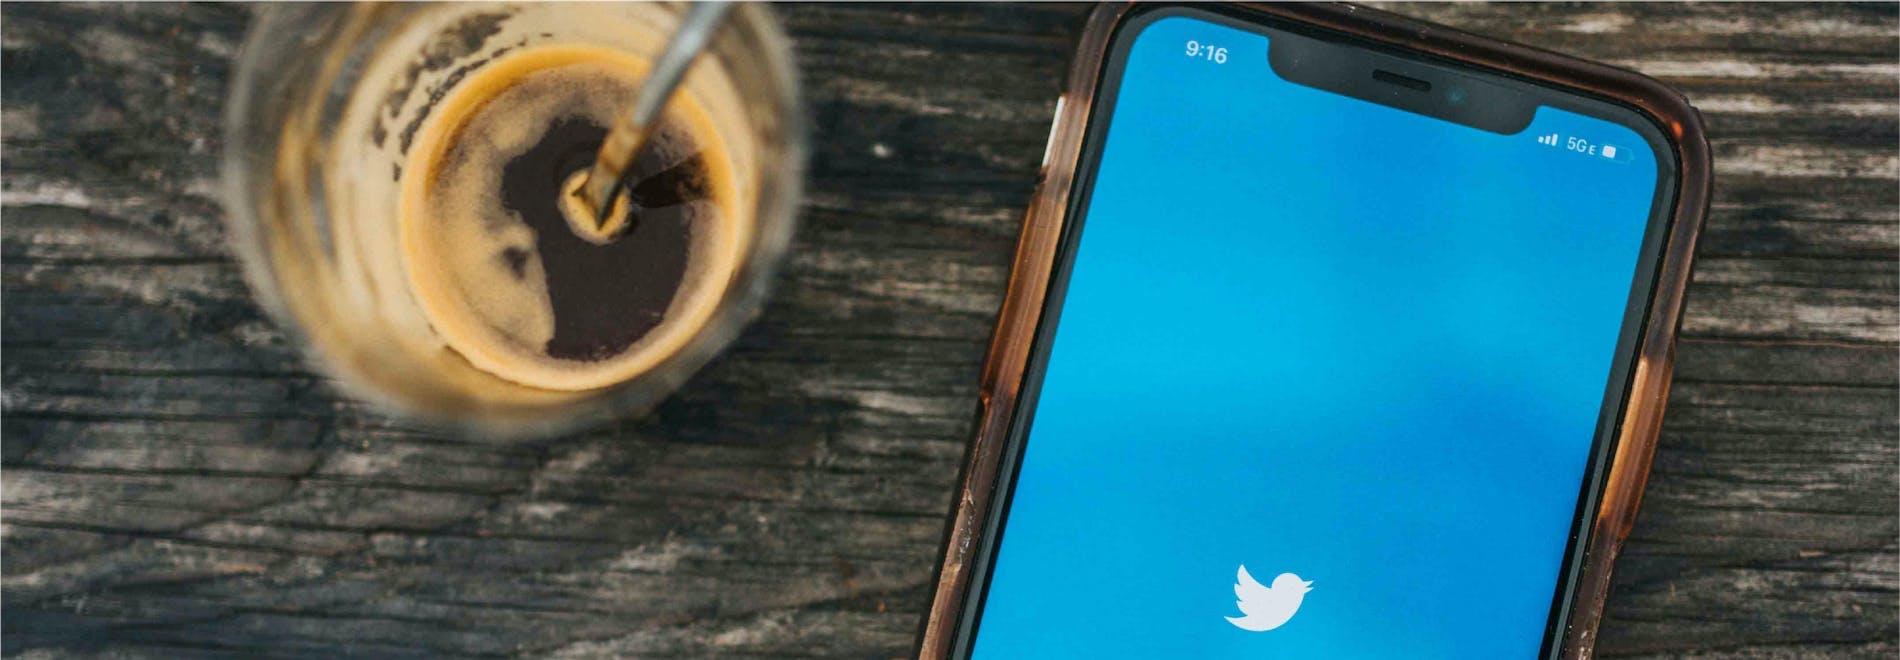 How can Twitter impact the corporate image and reputation of a company?